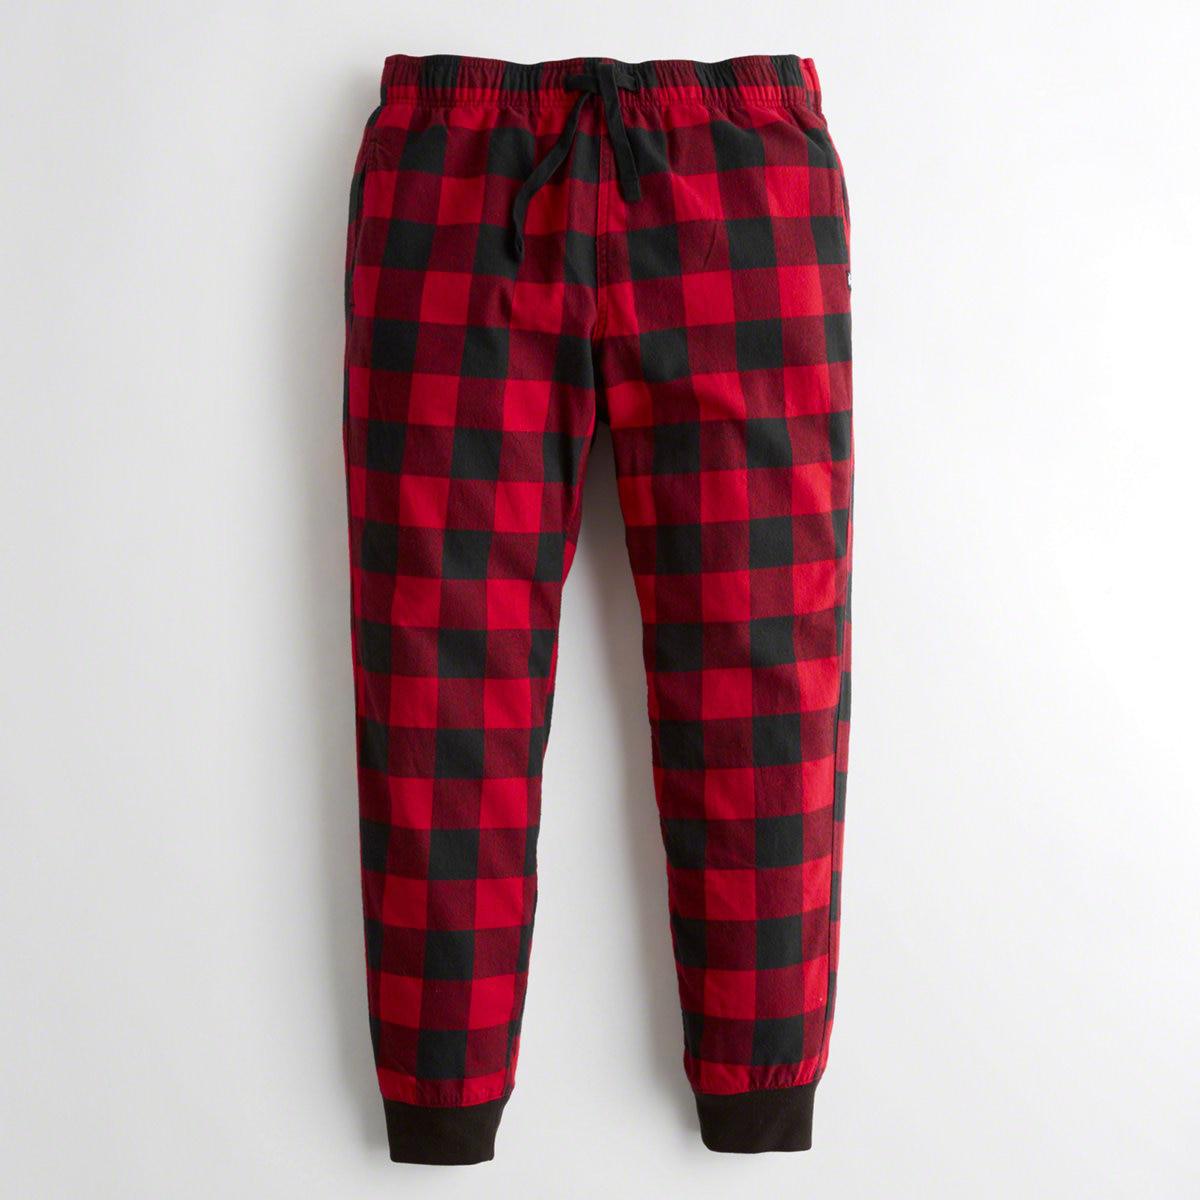 Lyst - Hollister Guys Plaid Flannel Jogger Pants From Hollister in Red ...